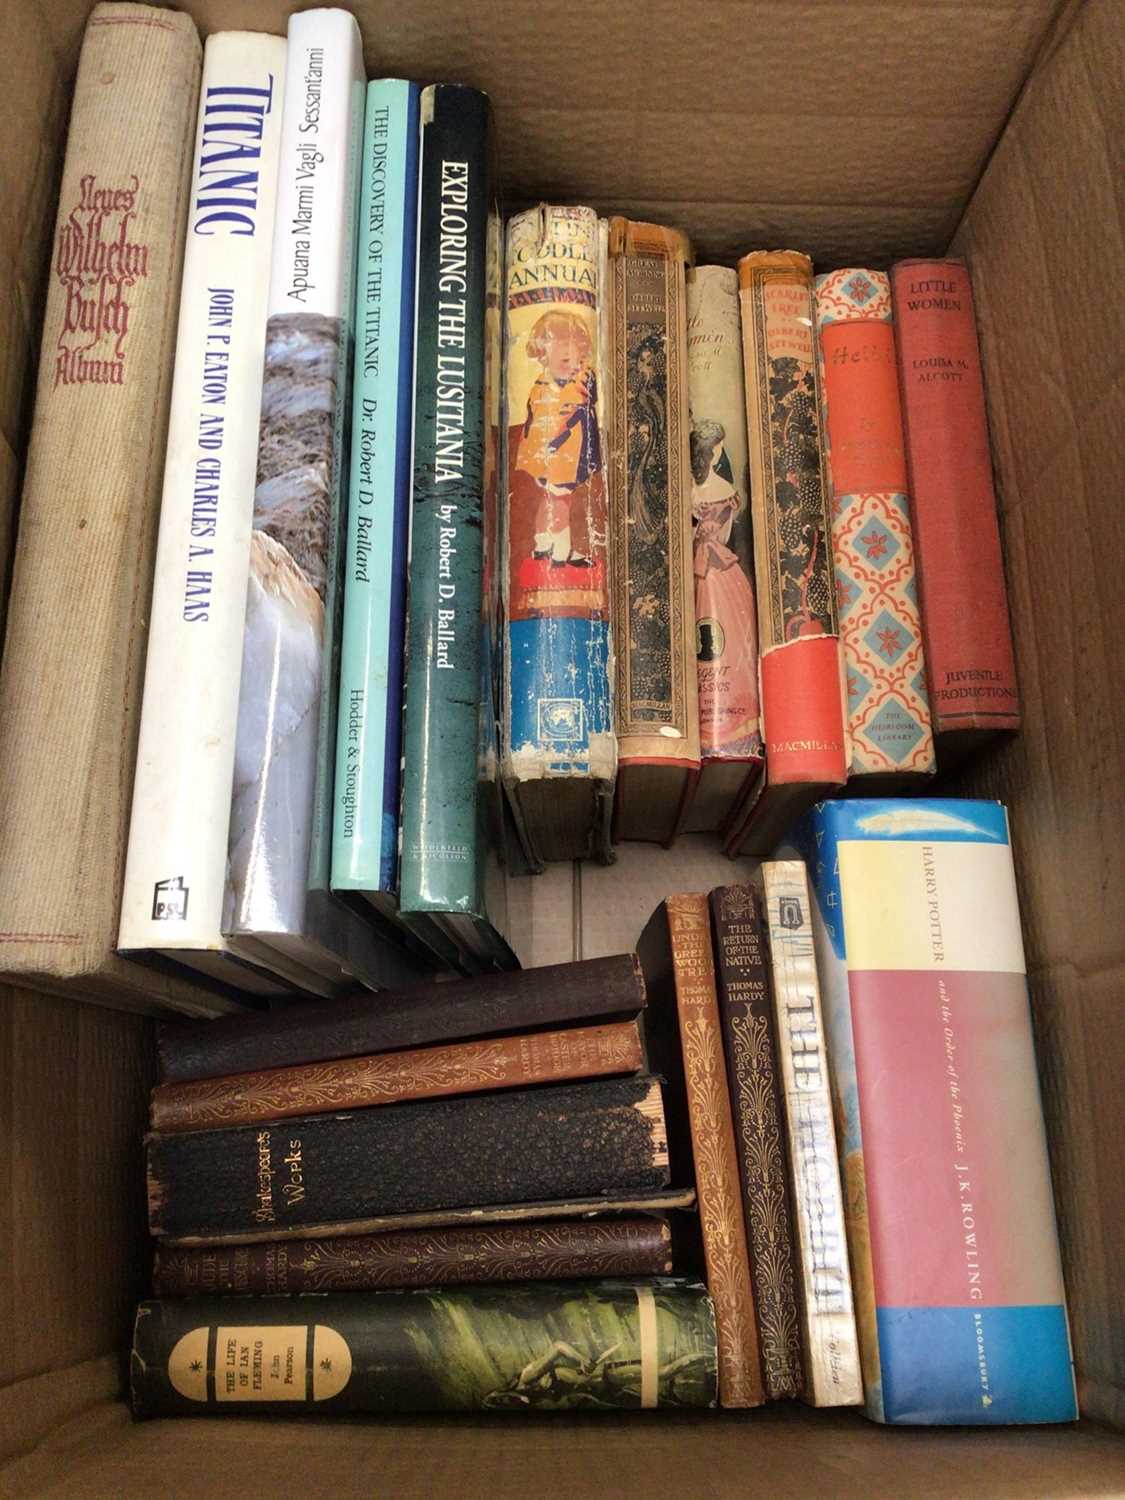 Box of antique and later books including Shakespeare, Thomas Hardy, The Life of Ian Fleming by John